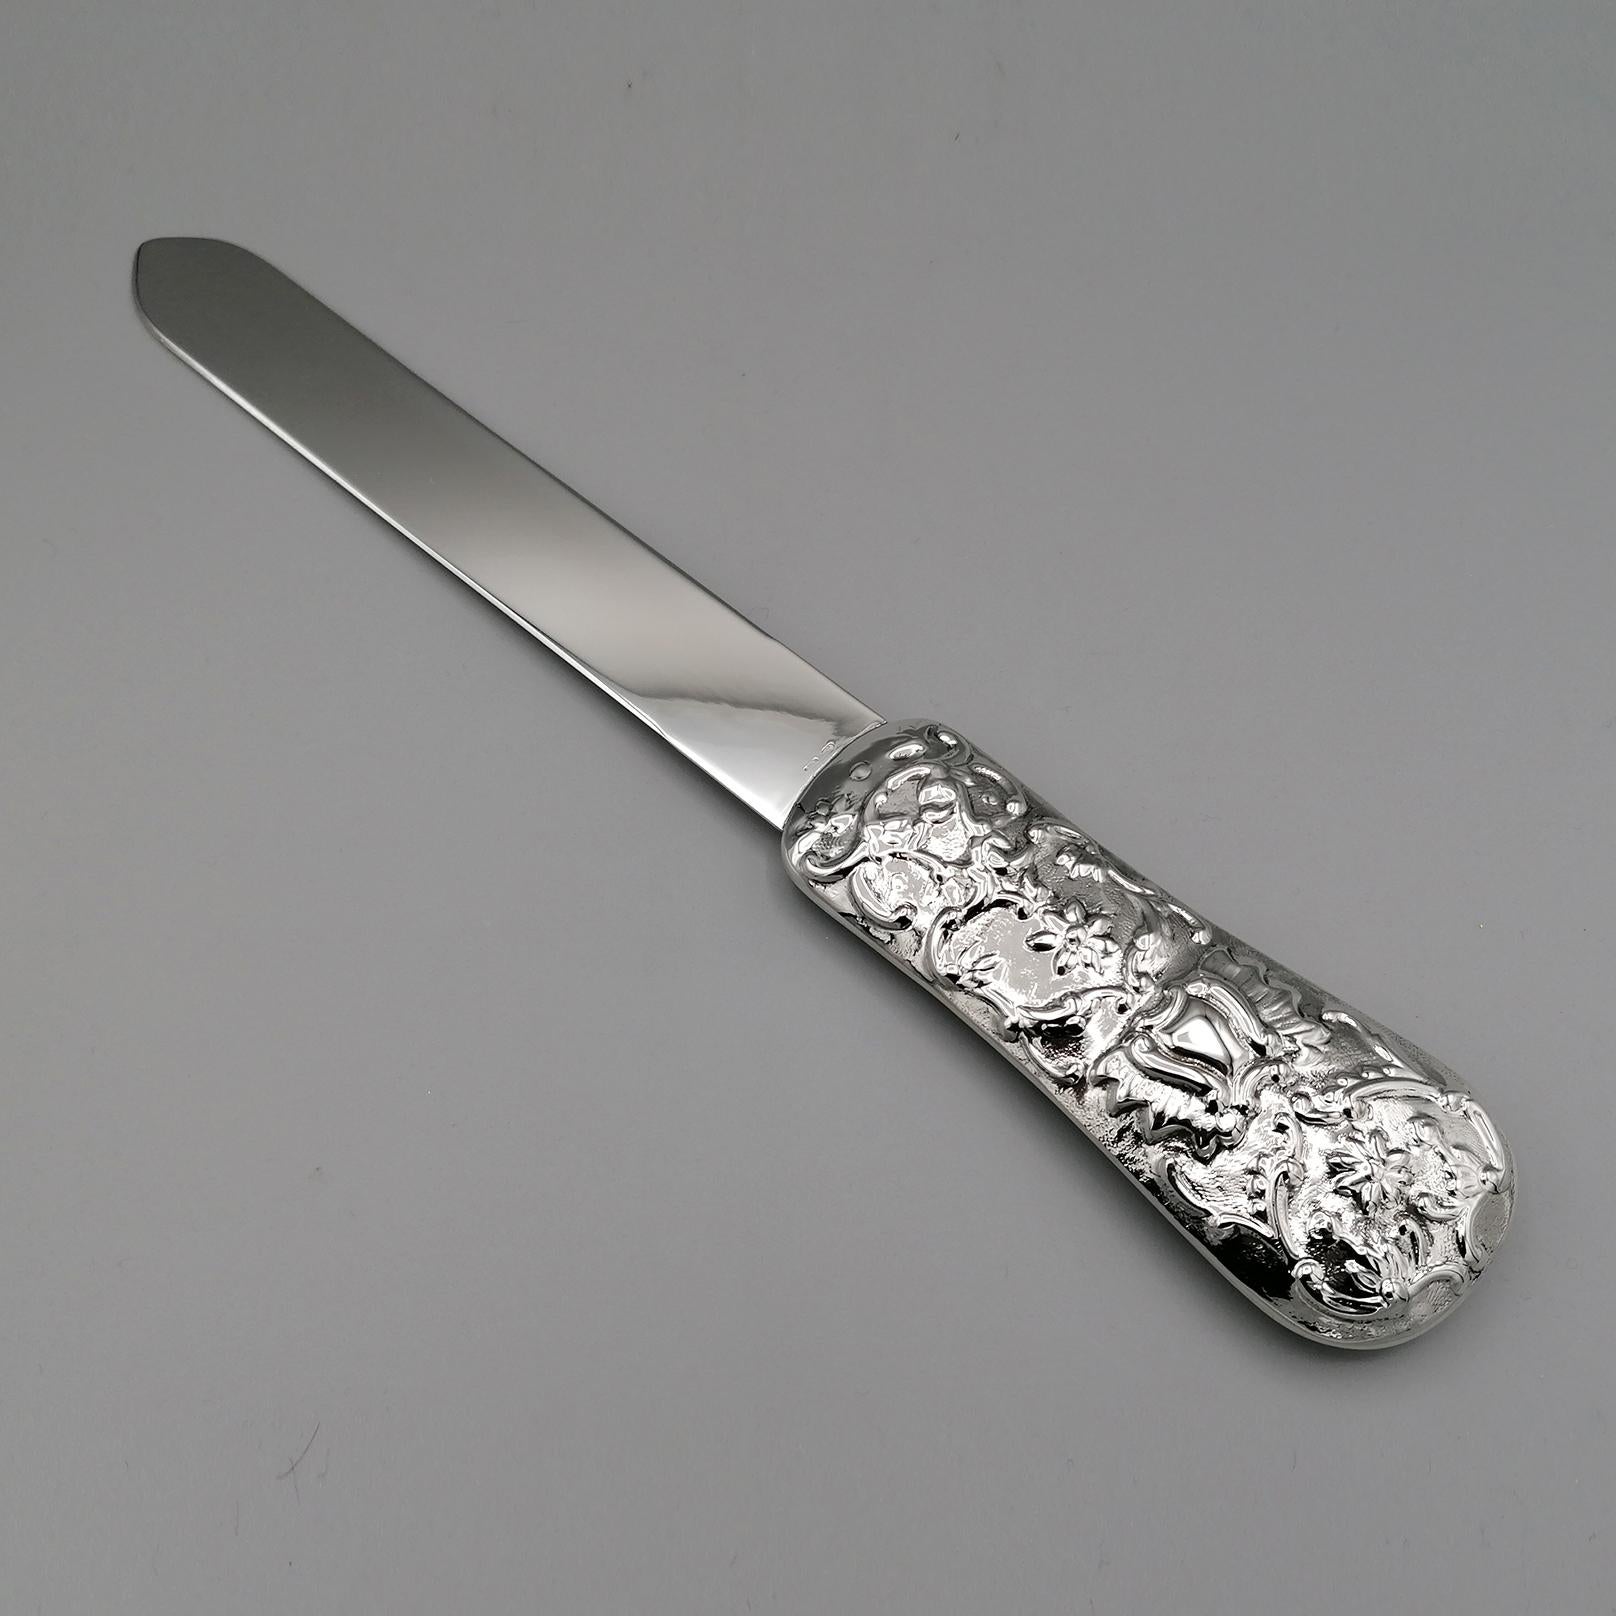 Large, completely handmade, sterling silver letter opener. 
Perfect for a prestigious desk.
The blade is smooth while the hand is embossed by hand on both sides with scrolls and floral motifs.